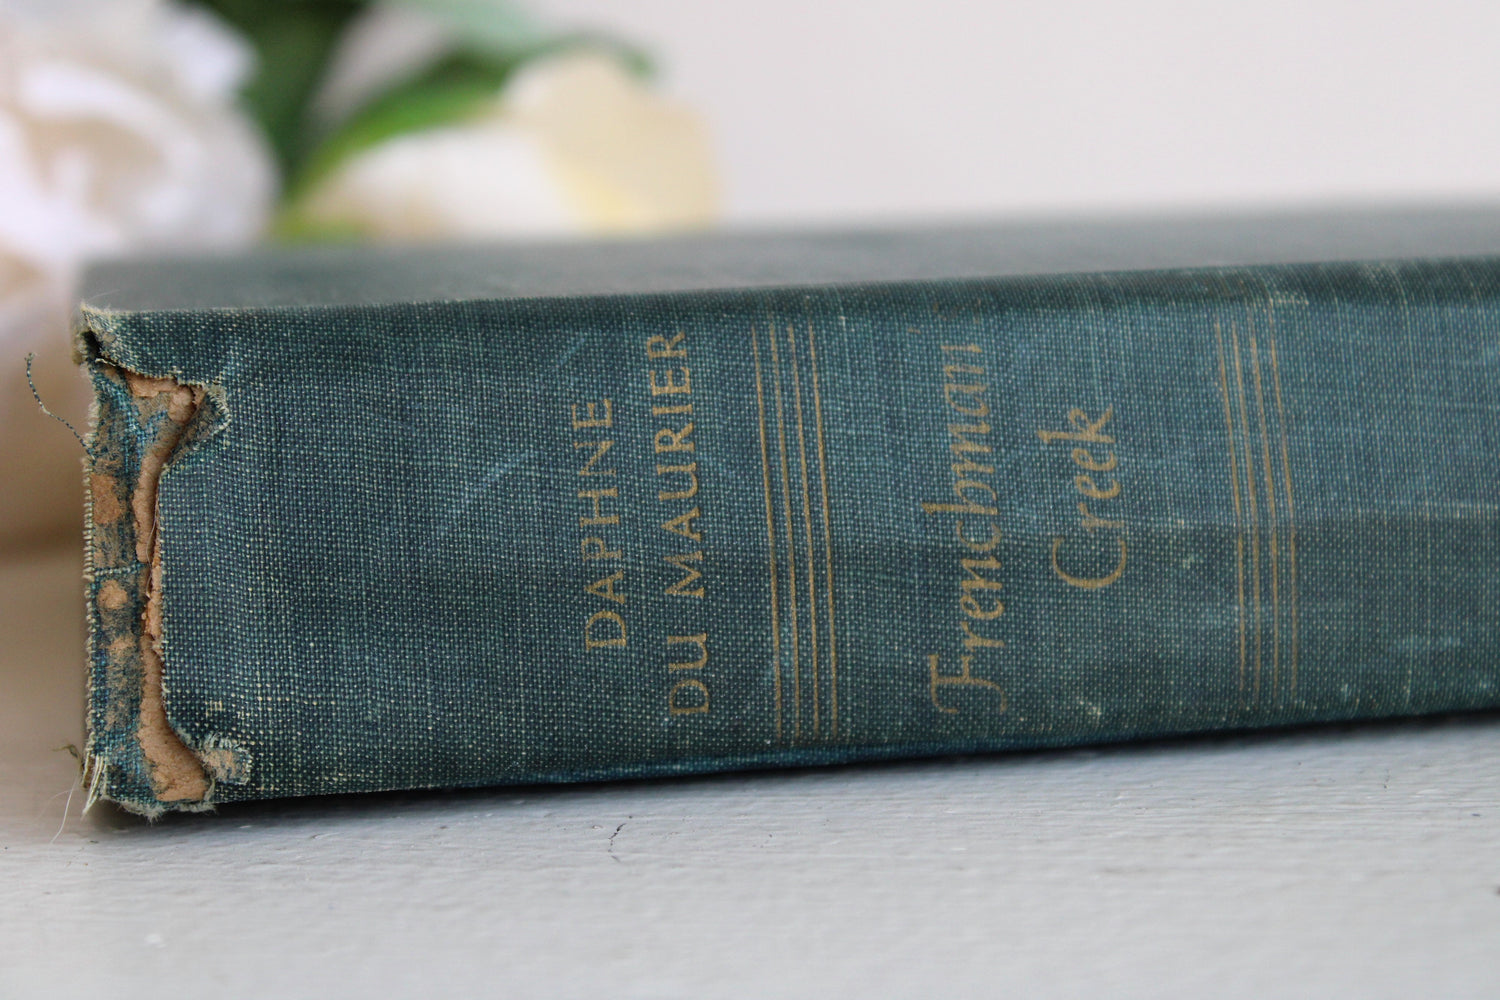 Vintage 1940s "Frenchman's Creek" by Daphne Du Maurier